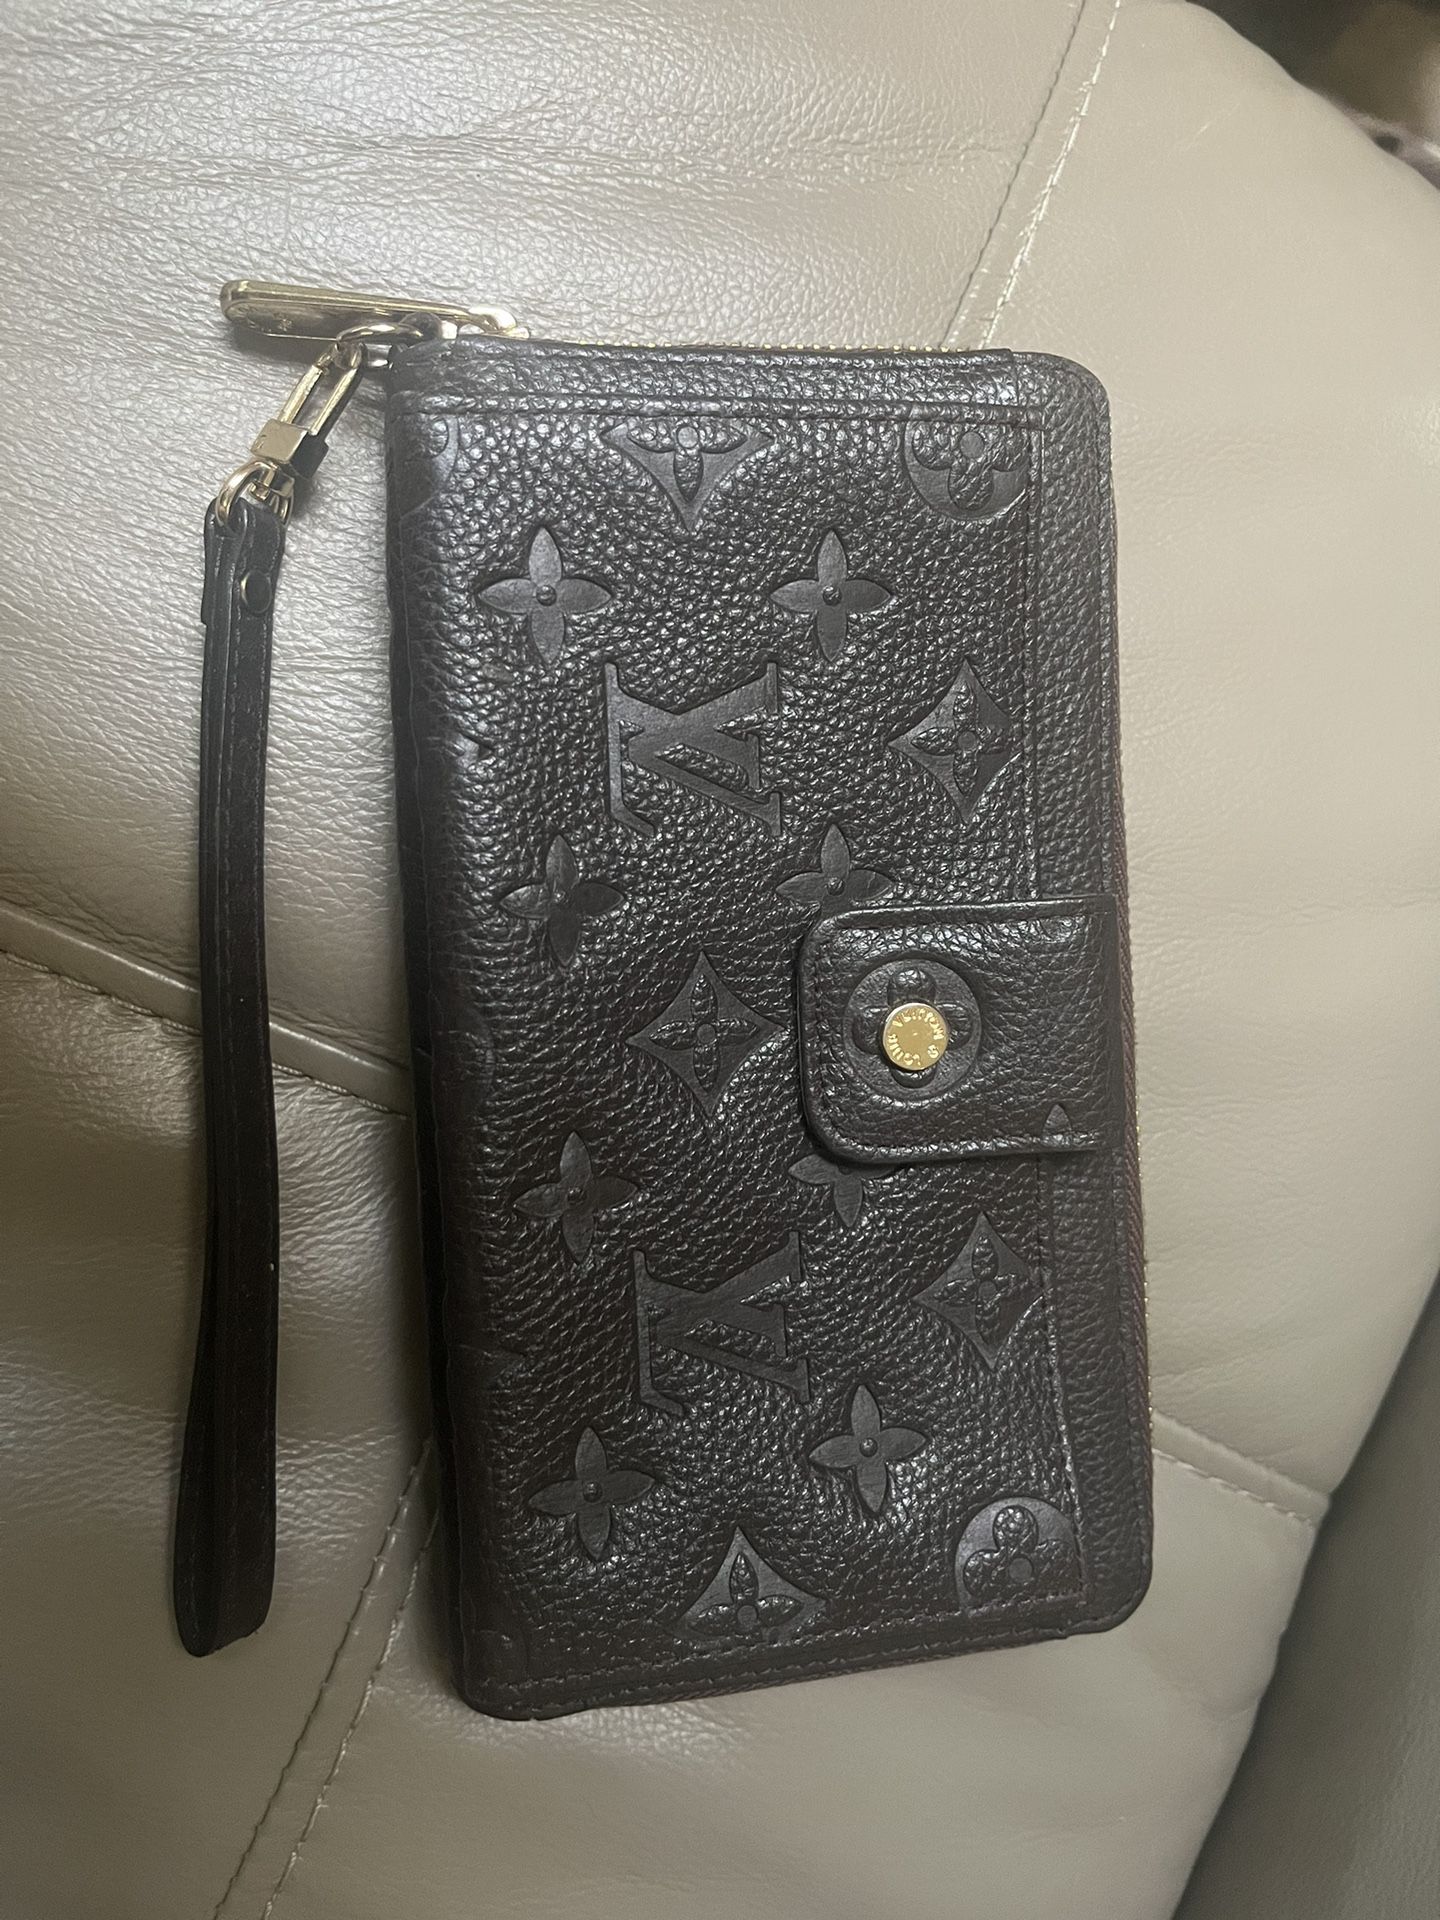 Brown Leather Louise Vuitton Wallet